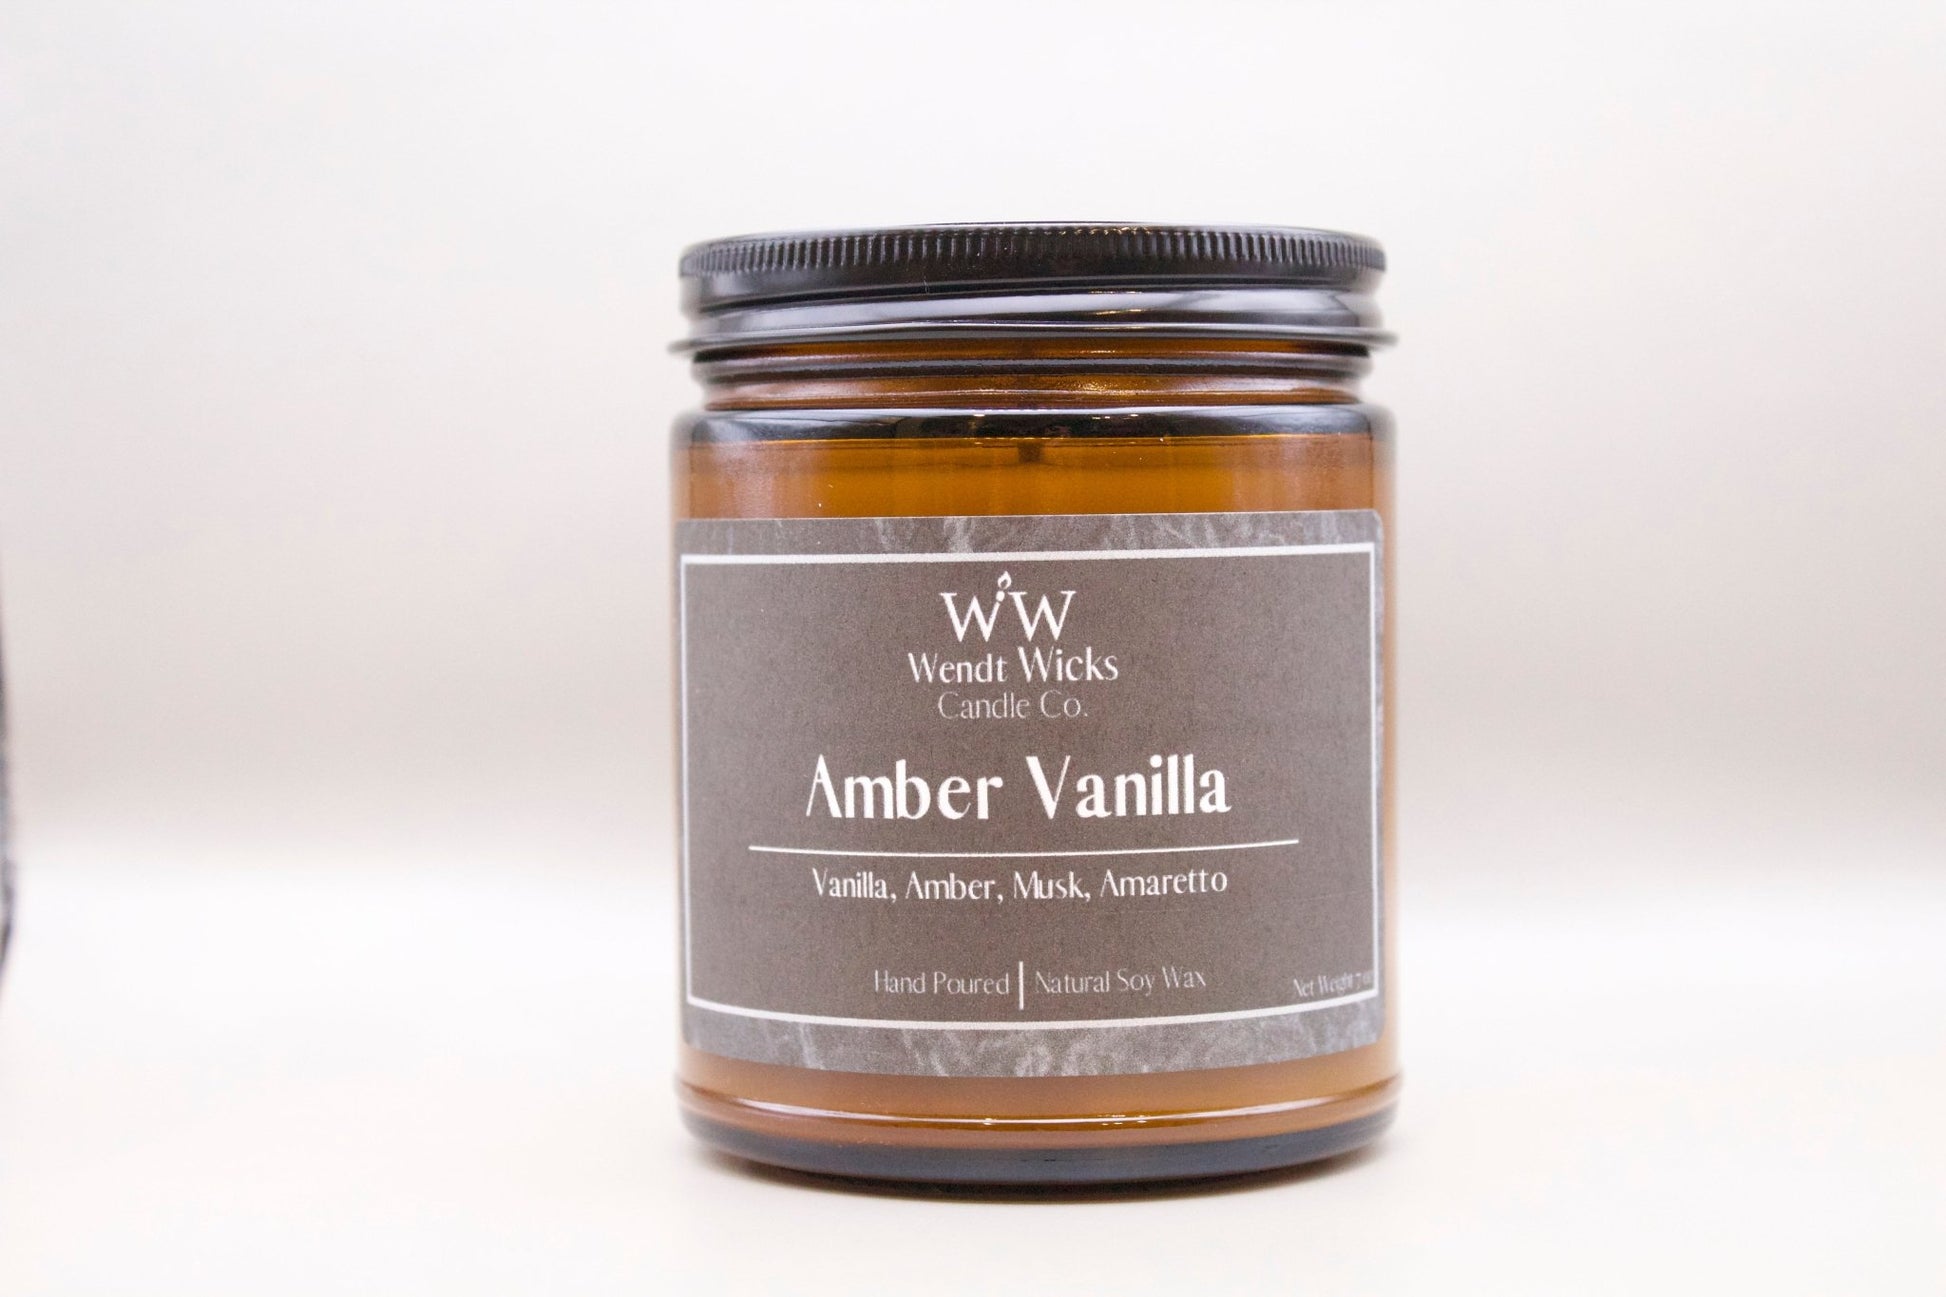 Amber Vanilla - Wendt Wicks Candle Co. - Amber candle